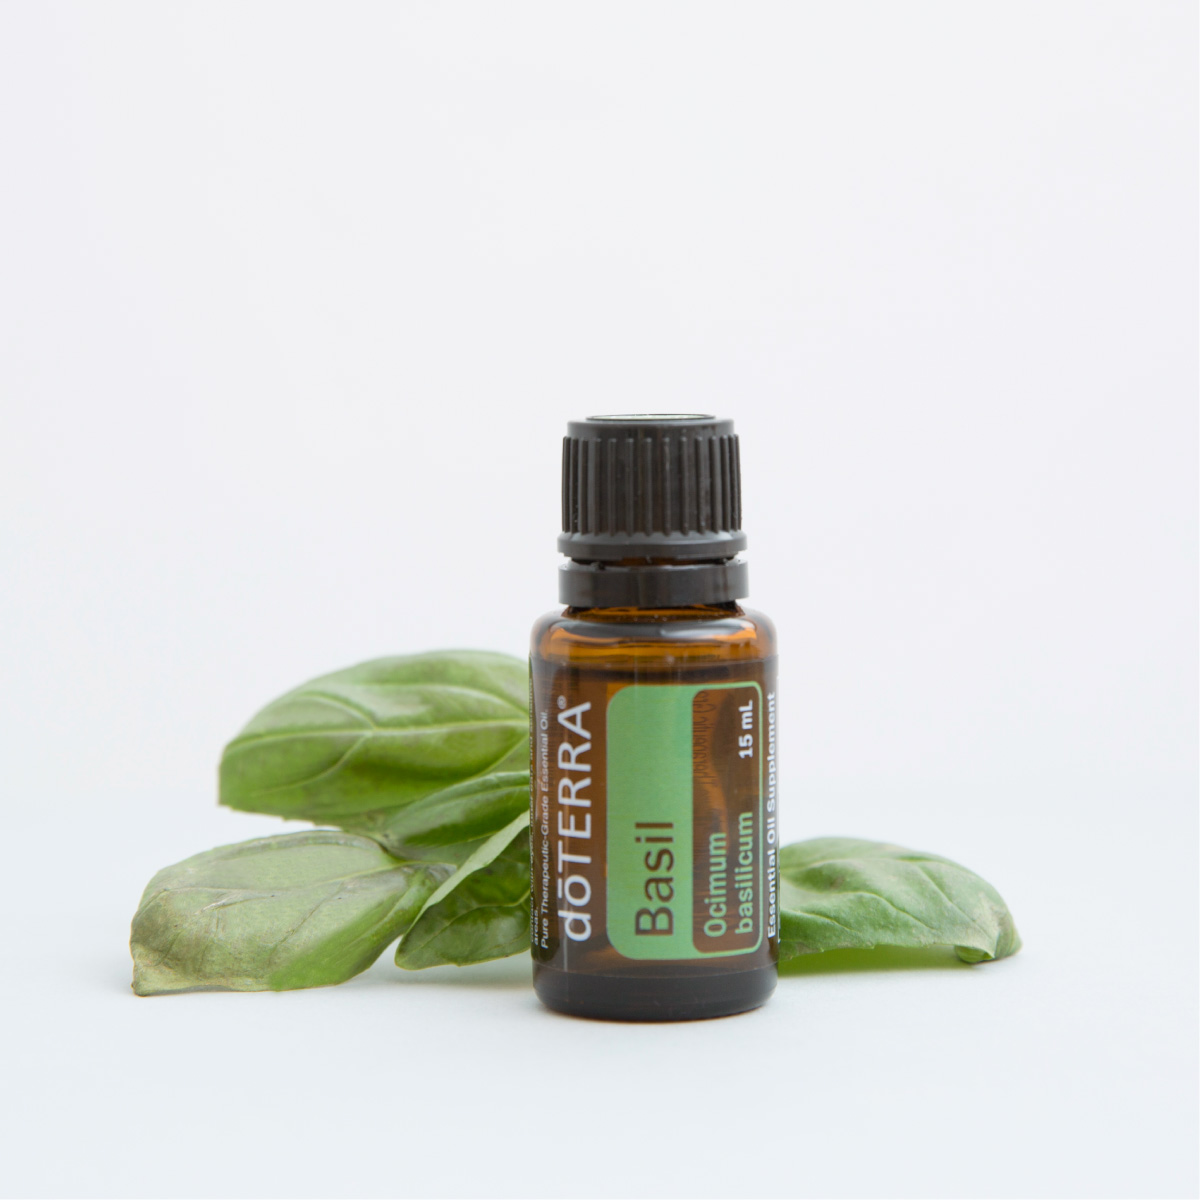 What is Basil essential oil used for? Many people use Basil oil for things like cooking, reducing anxious feelings, and promoting focus.